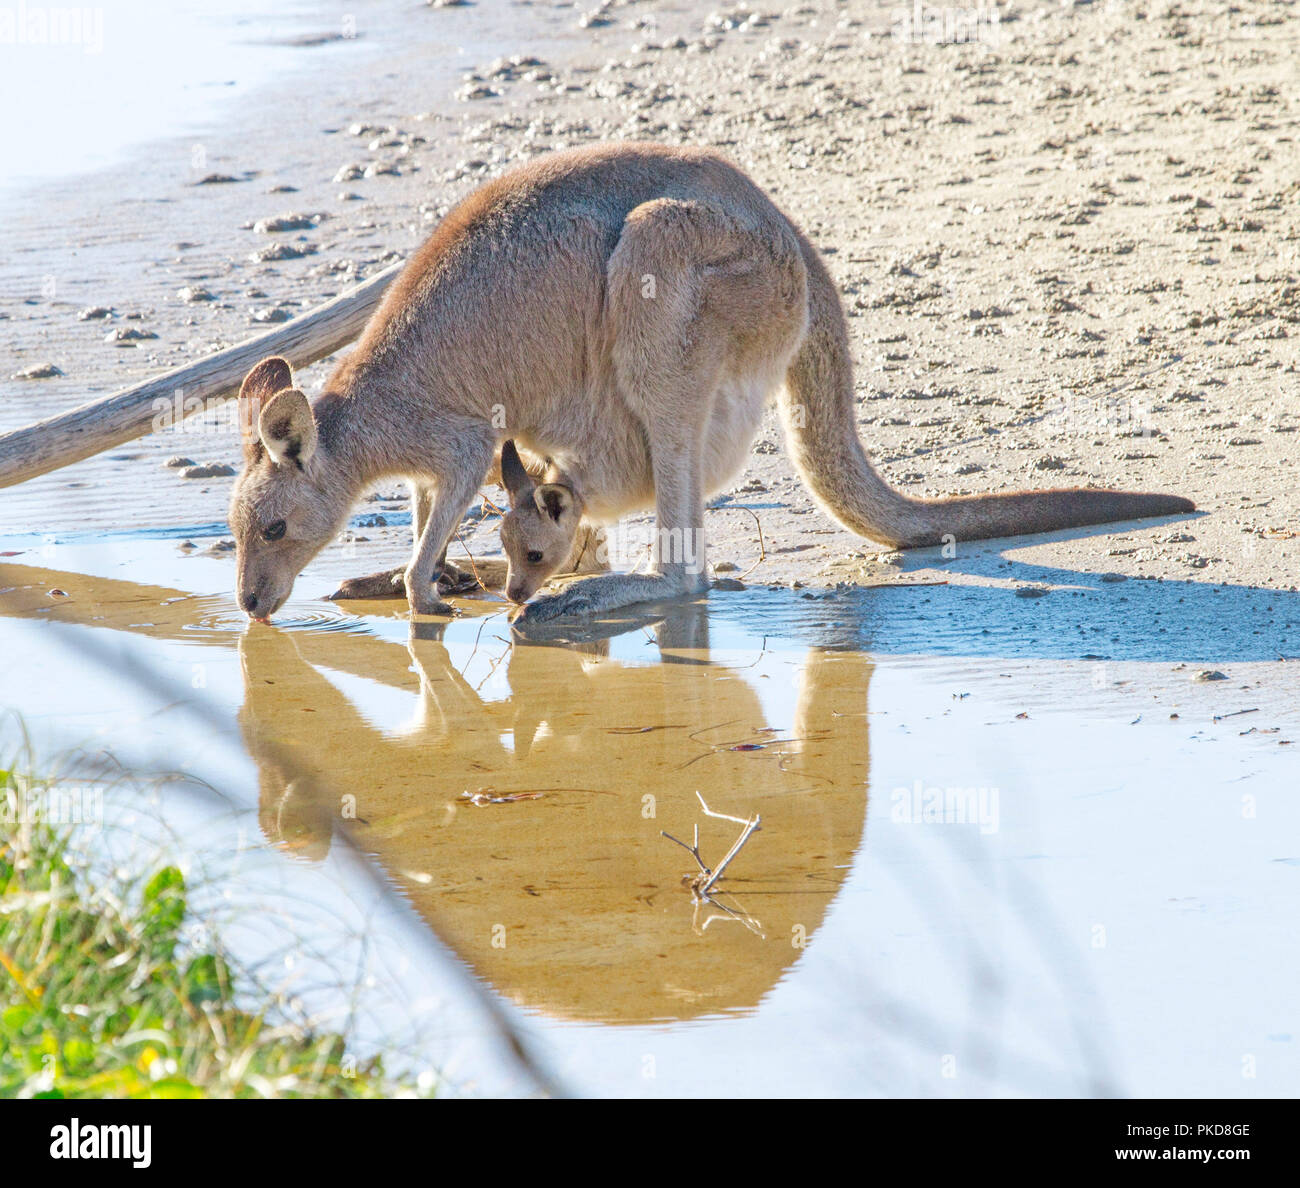 Female eastern grey kangaroo drinking from & reflected in coastal stream with joey leaning out of pouch to drink too - in the wild in tNSW Australia Stock Photo